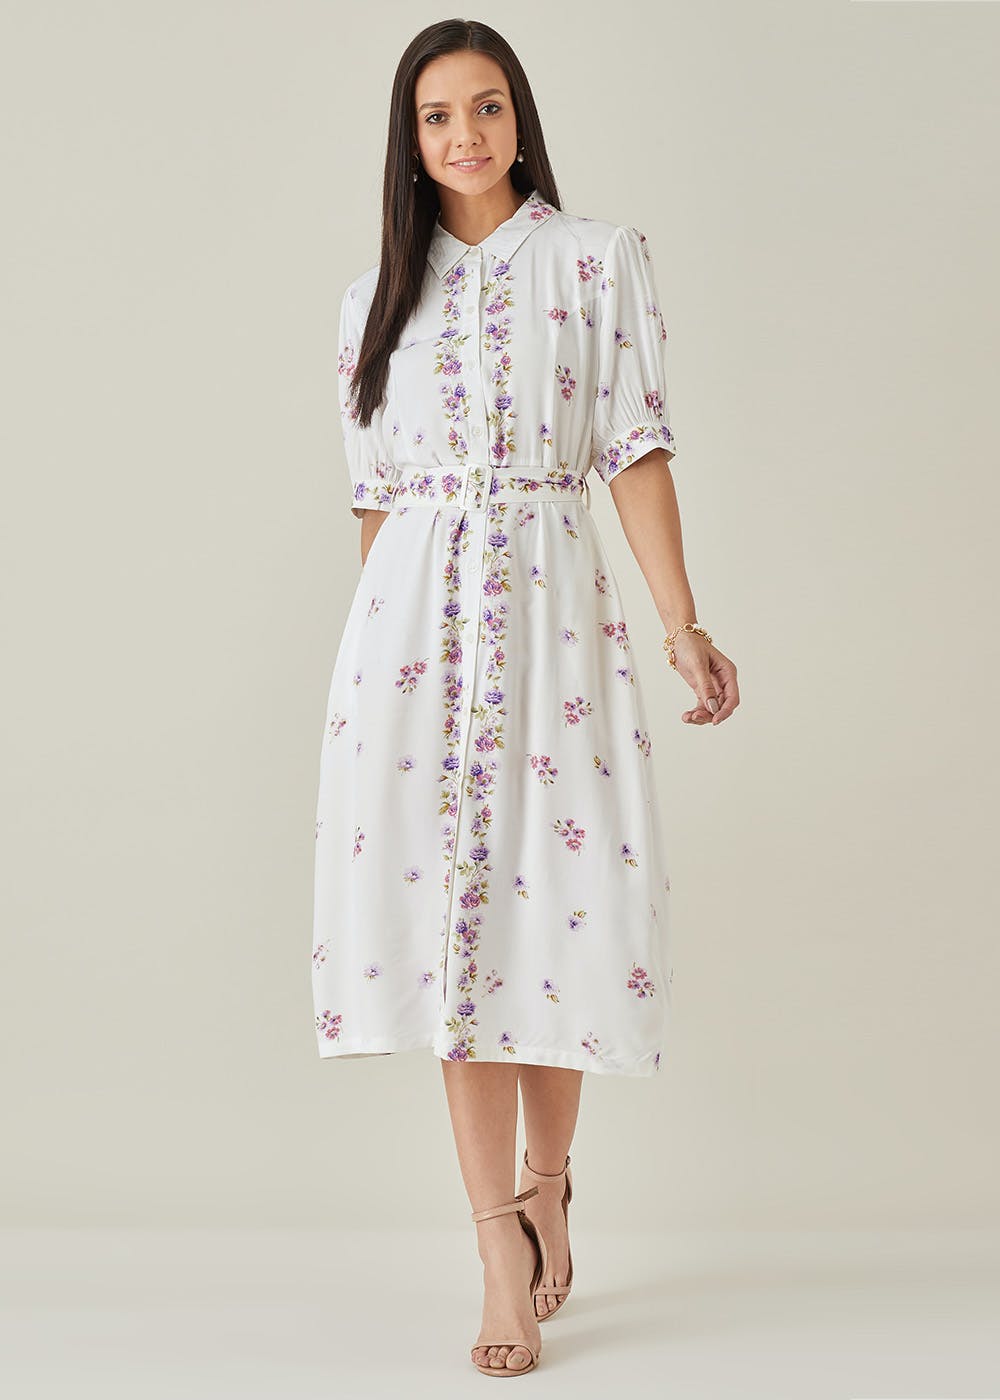 Floral Printed White Dress With Belt